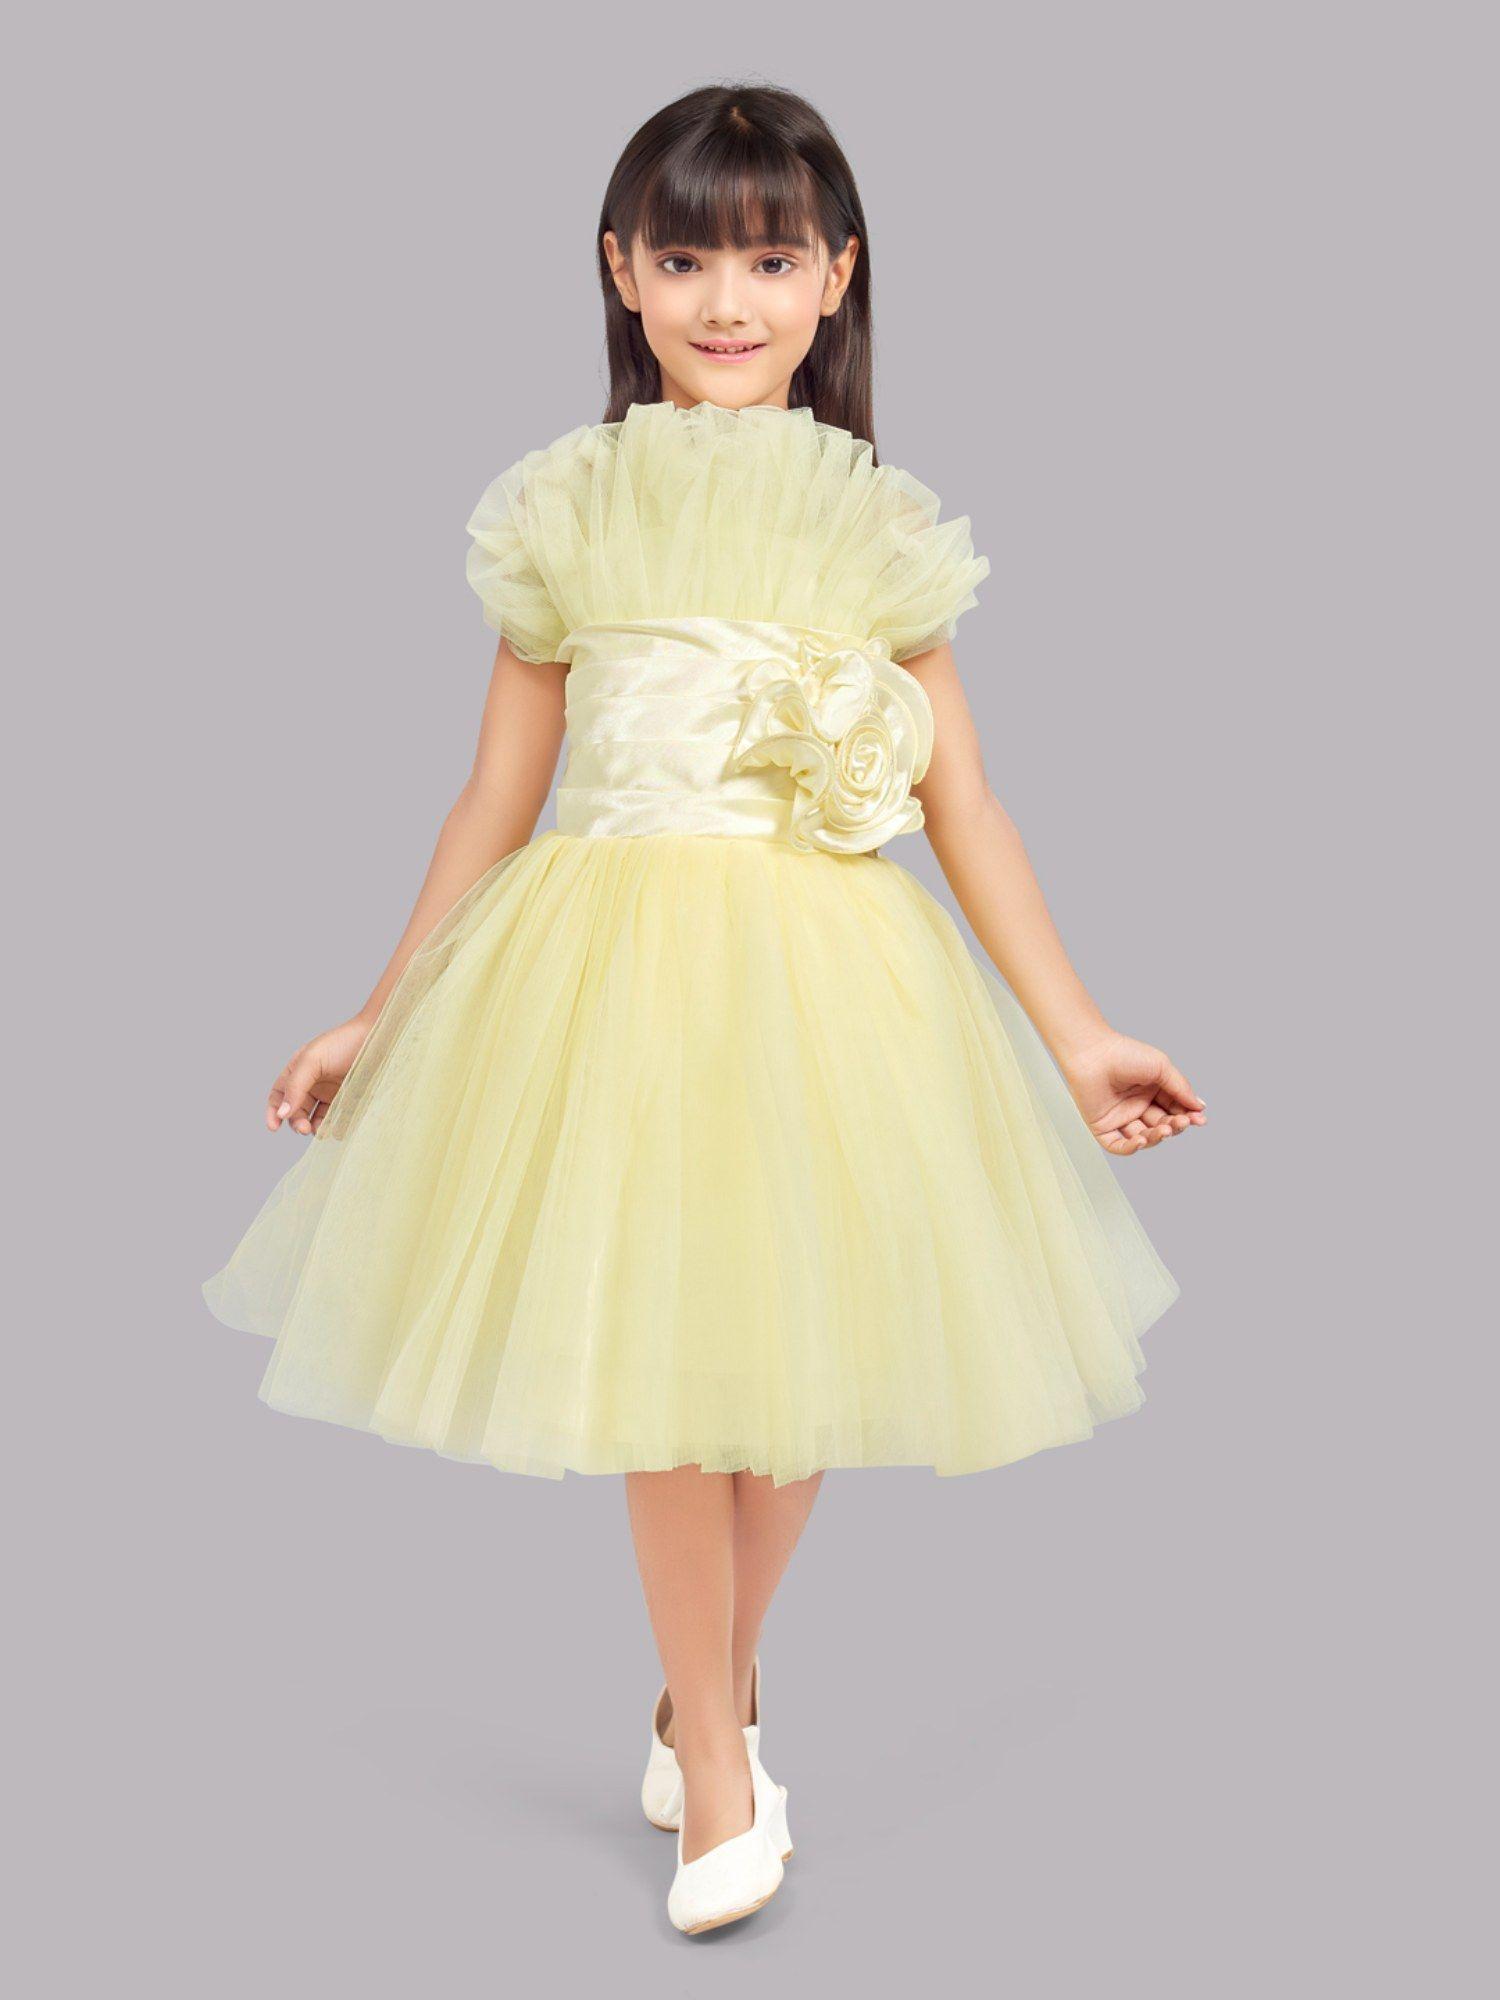 Ruffled Silhouette Party Dress Yellow